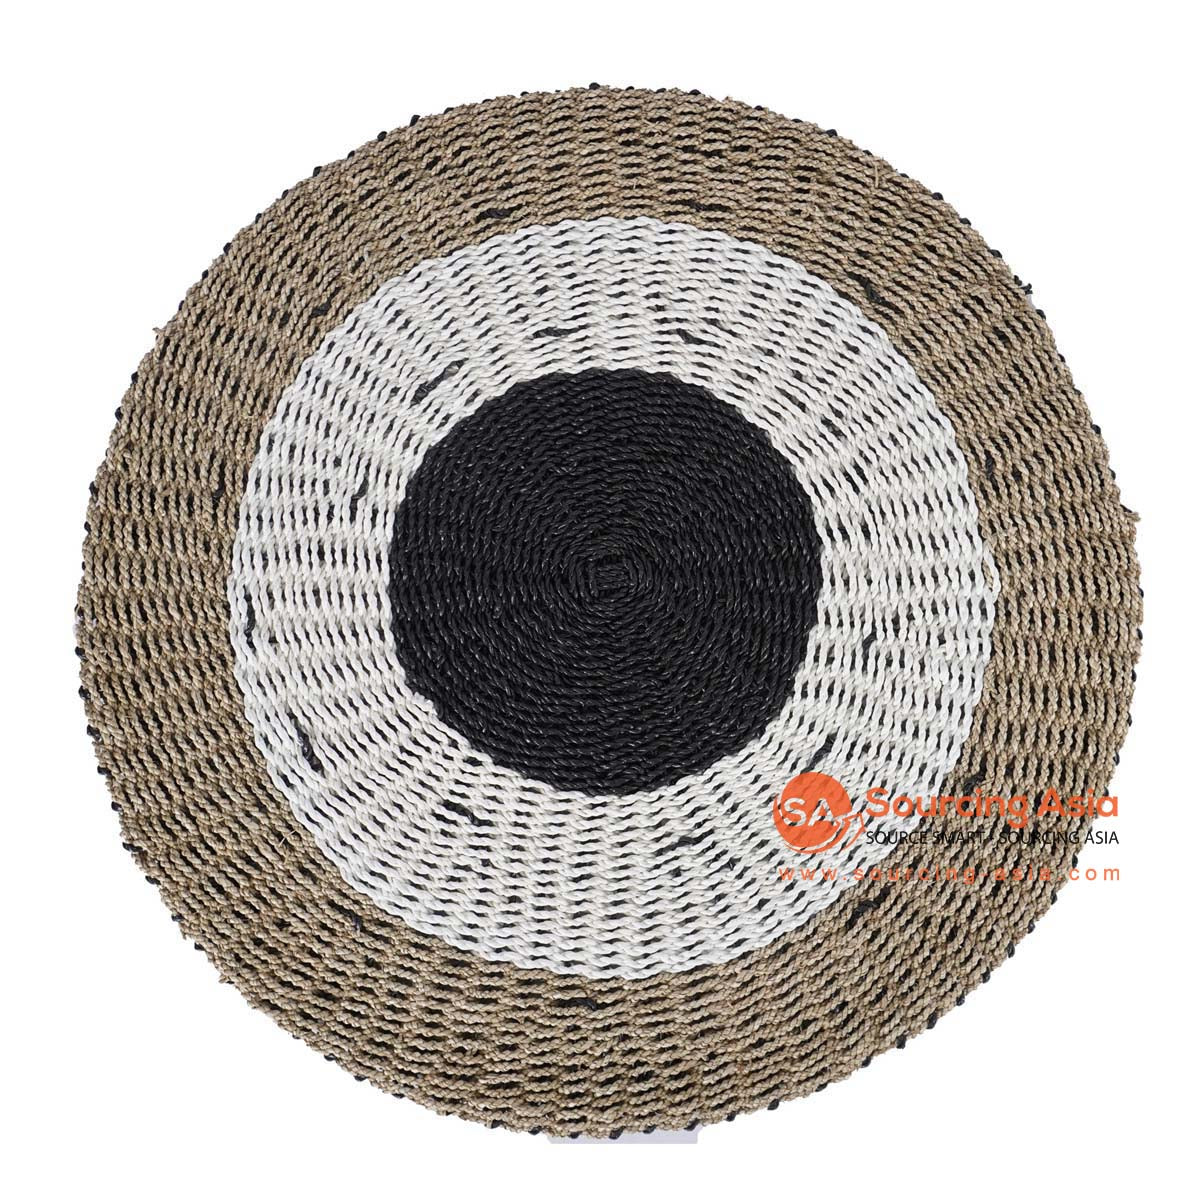 HBSC367 MULTICOLOR SEAGRASS ROUND RUG